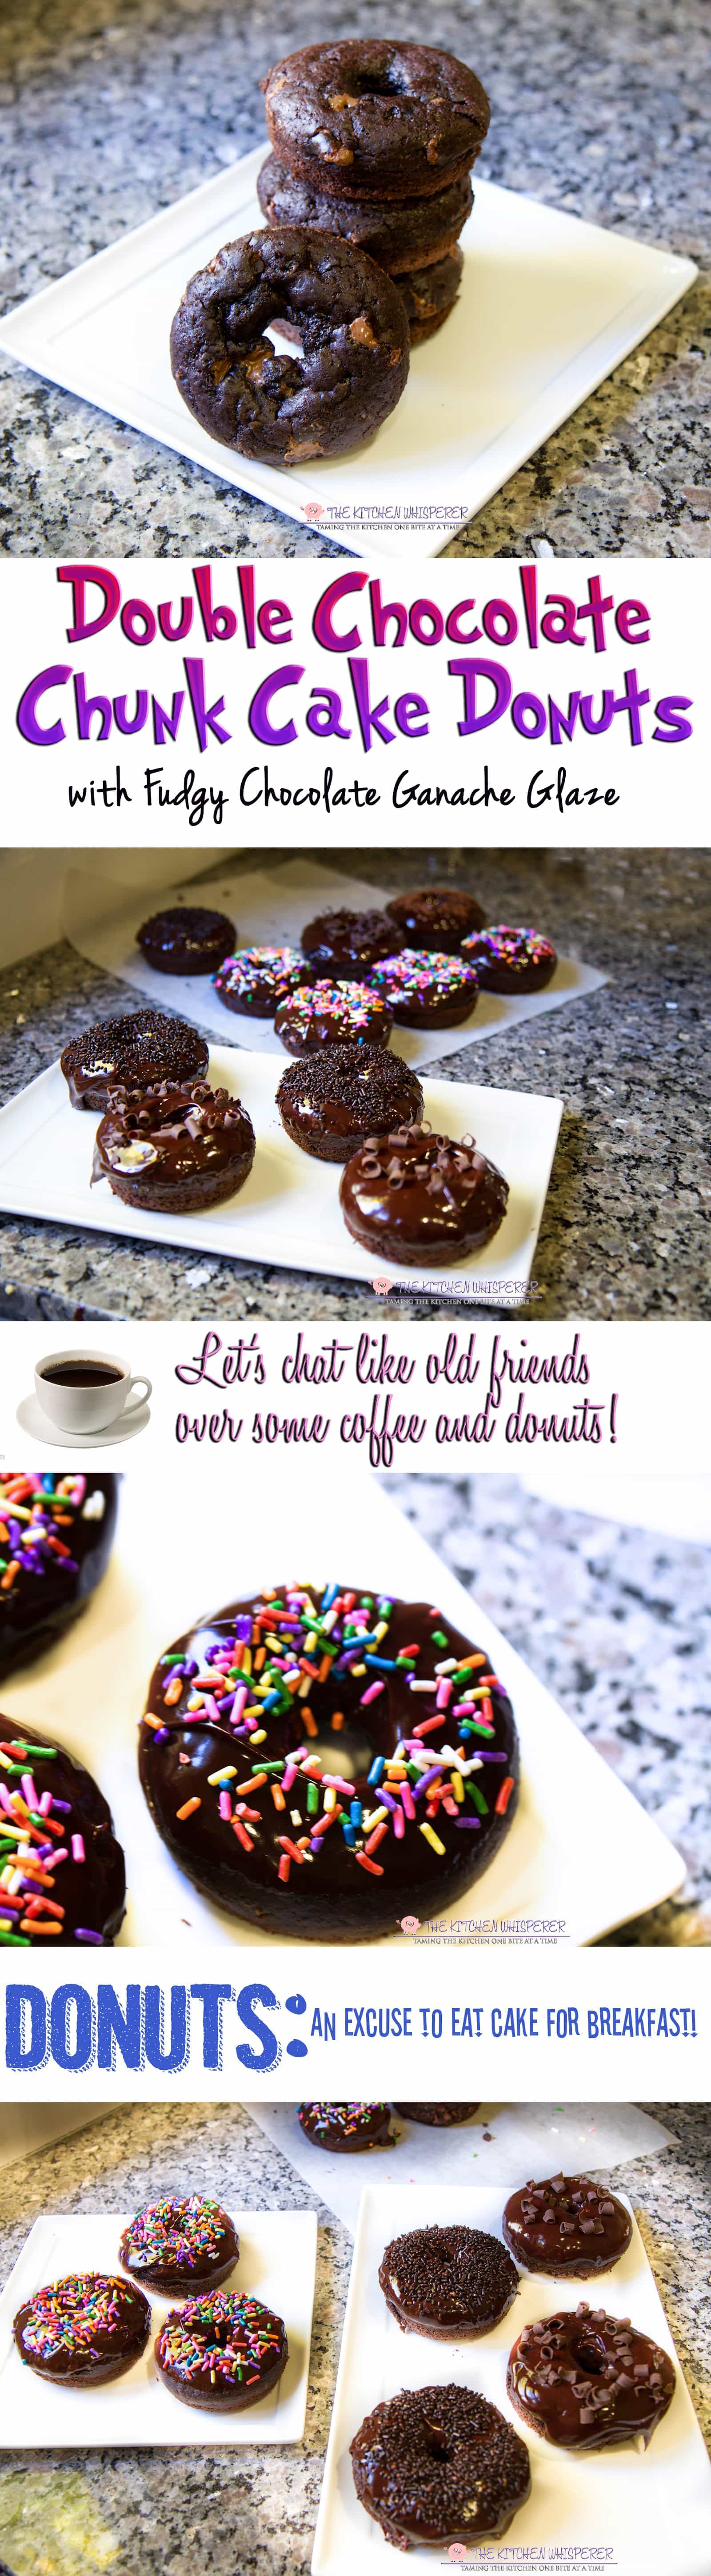 chocolate-chunk-cake-donuts-collage